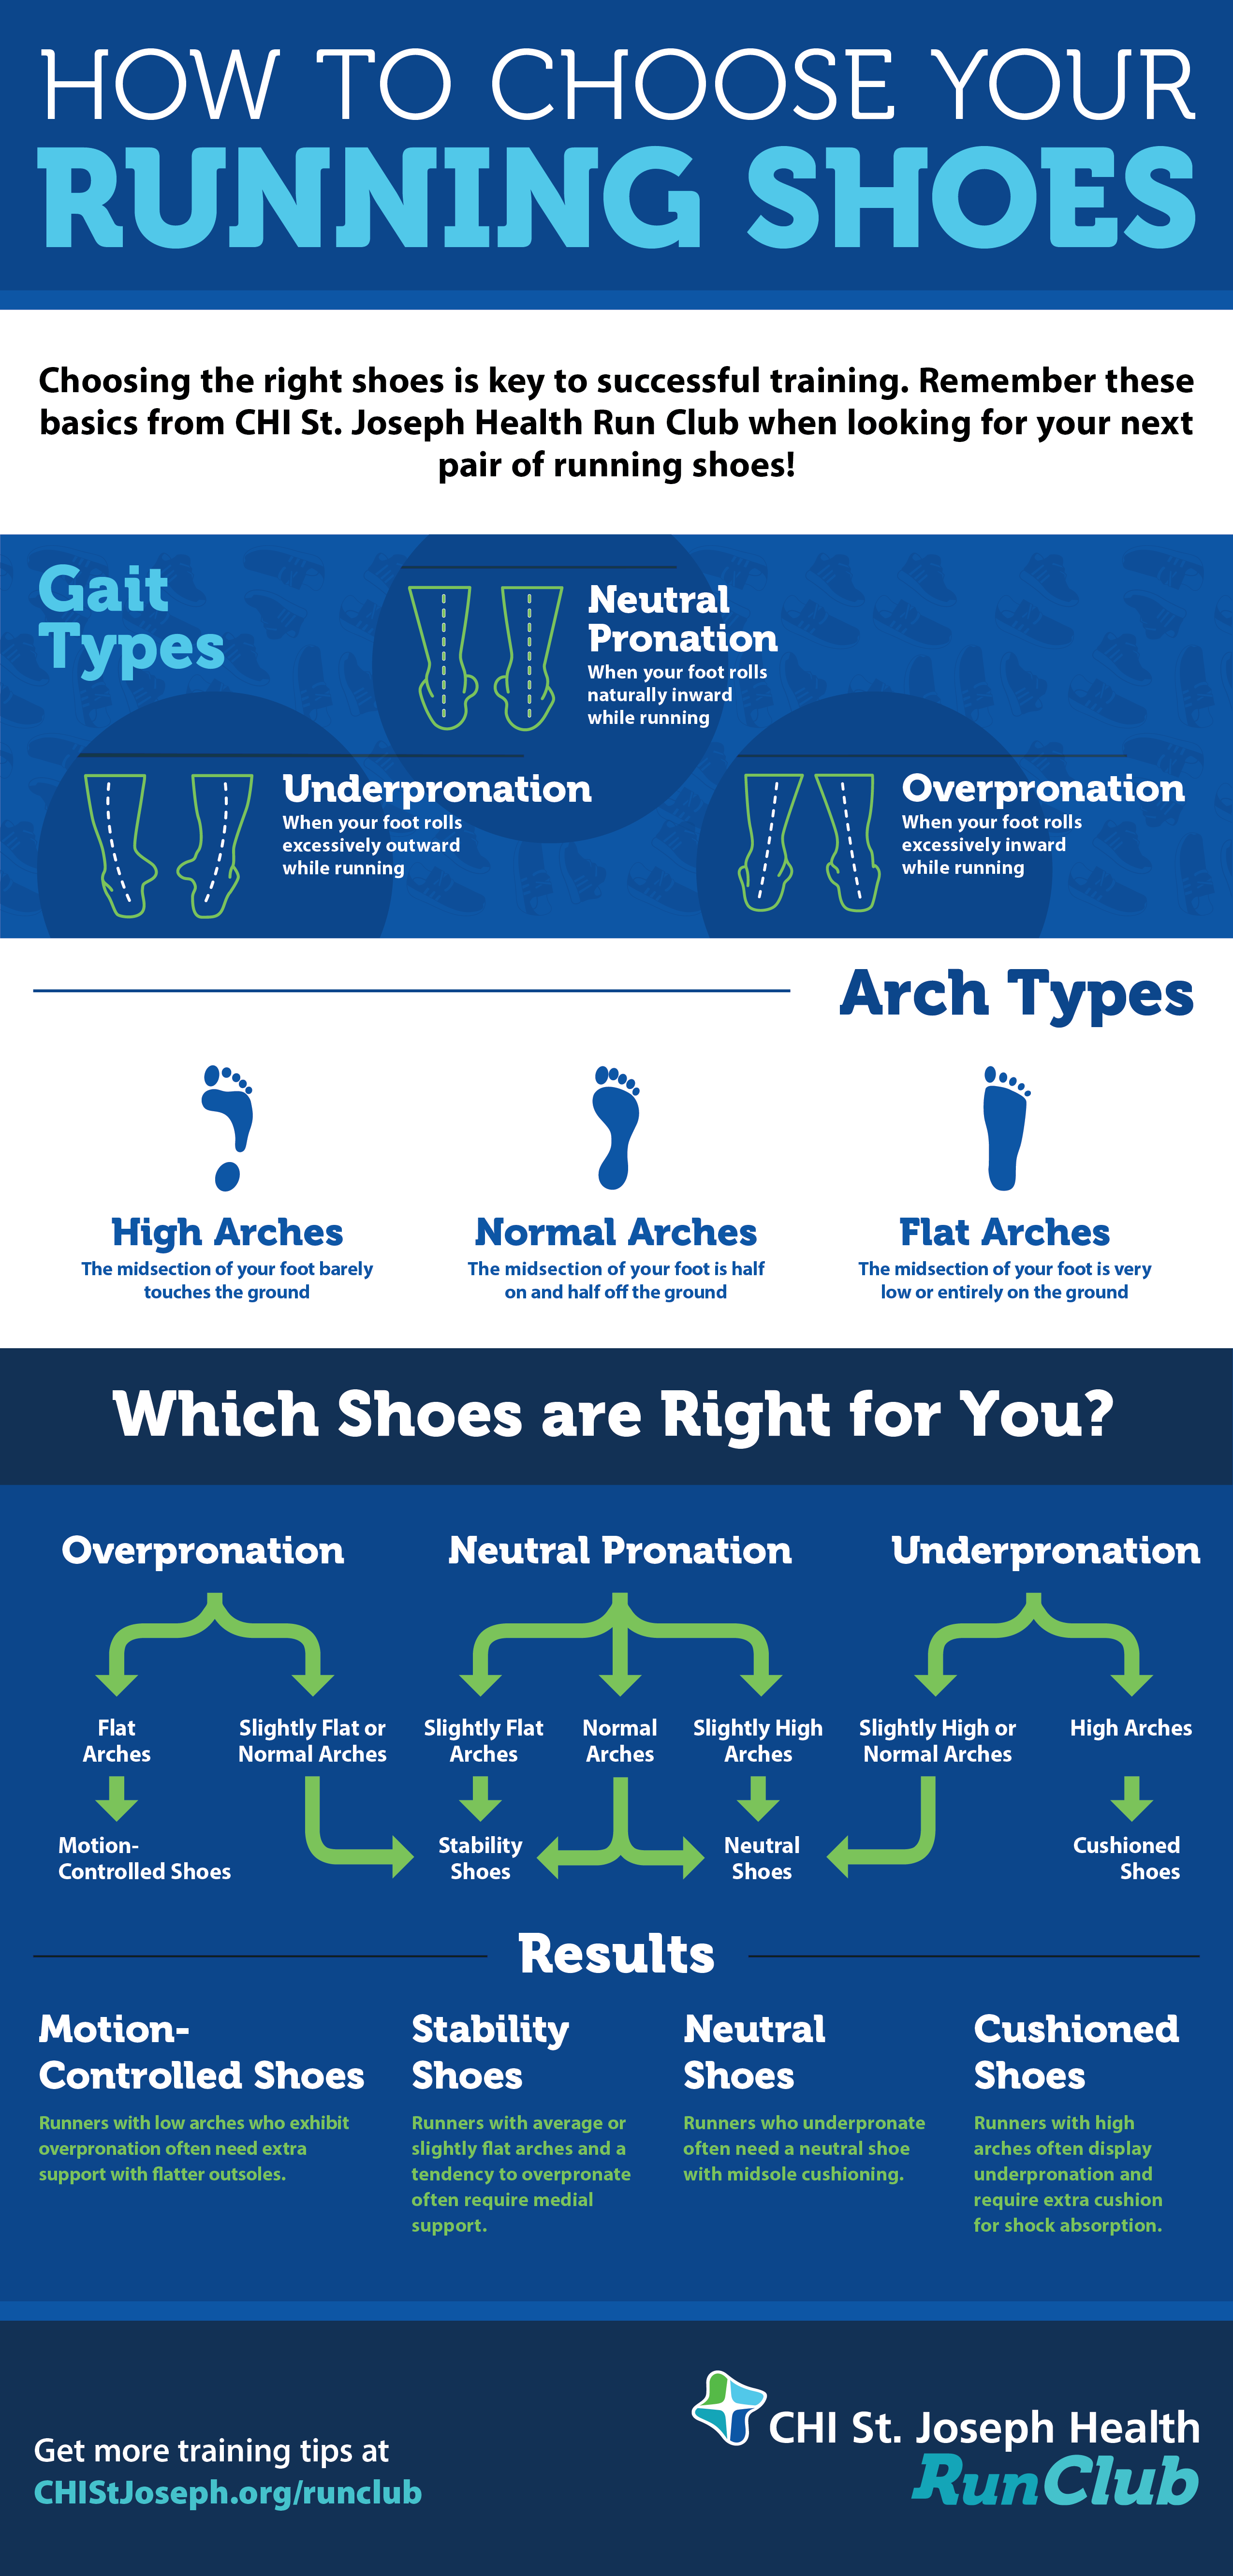 How to Choose Your Running Shoes | St. Joseph Health | St. Joseph Health